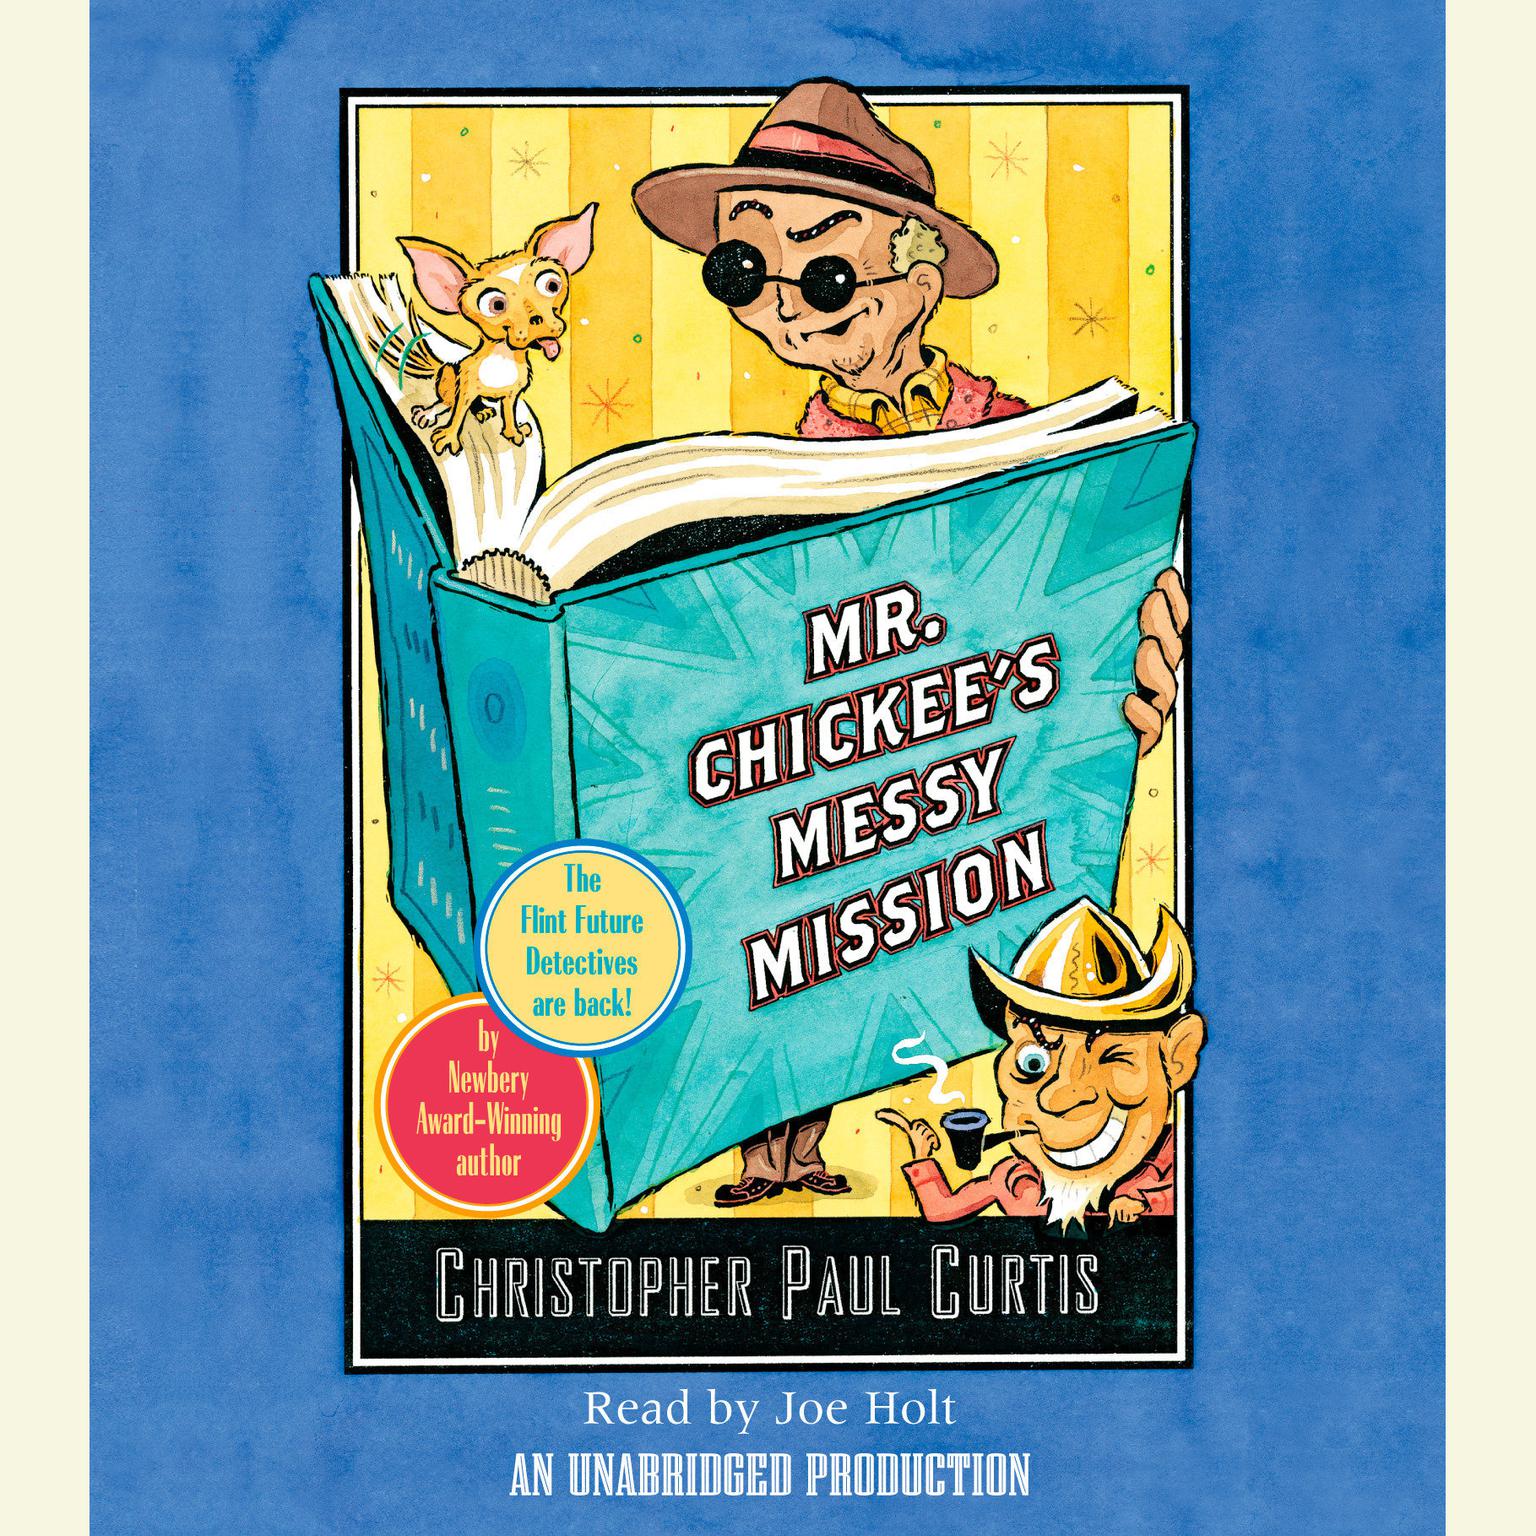 Mr. Chickees Messy Mission Audiobook, by Christopher Paul Curtis